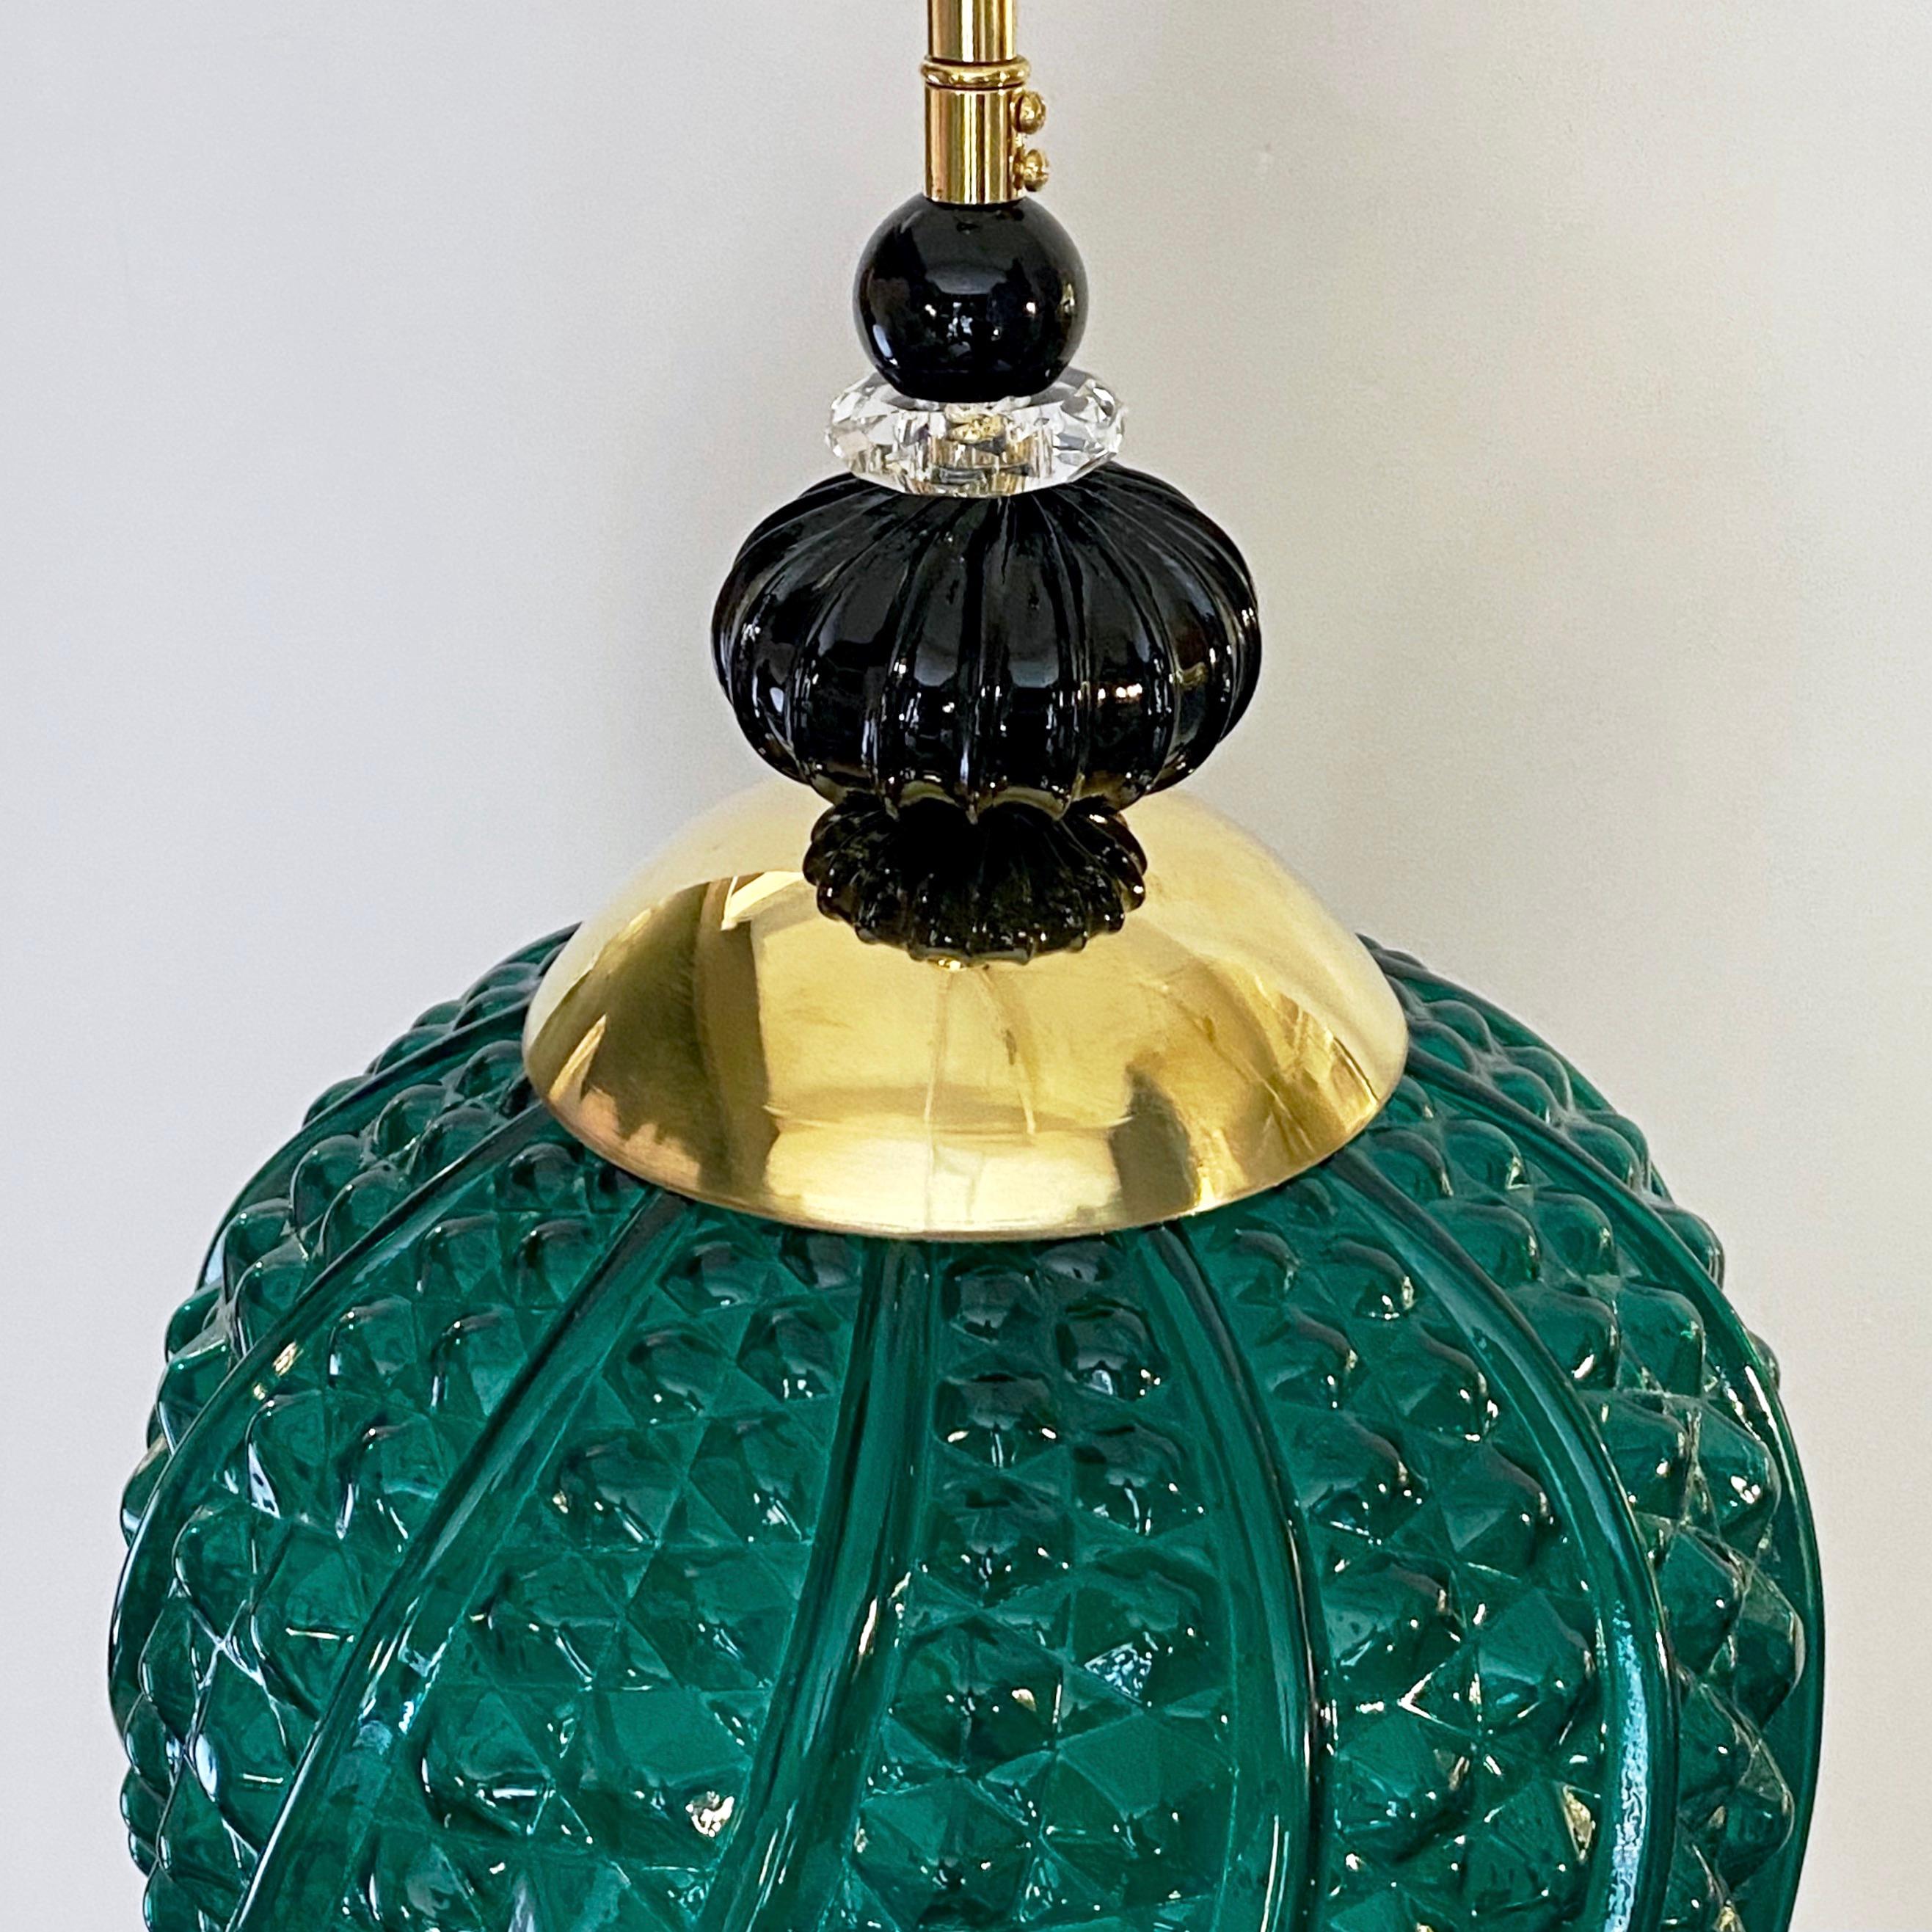 Bespoke Italian Oval Black Crystal Green Murano Glass Brass Egg Pendant Light In New Condition For Sale In New York, NY